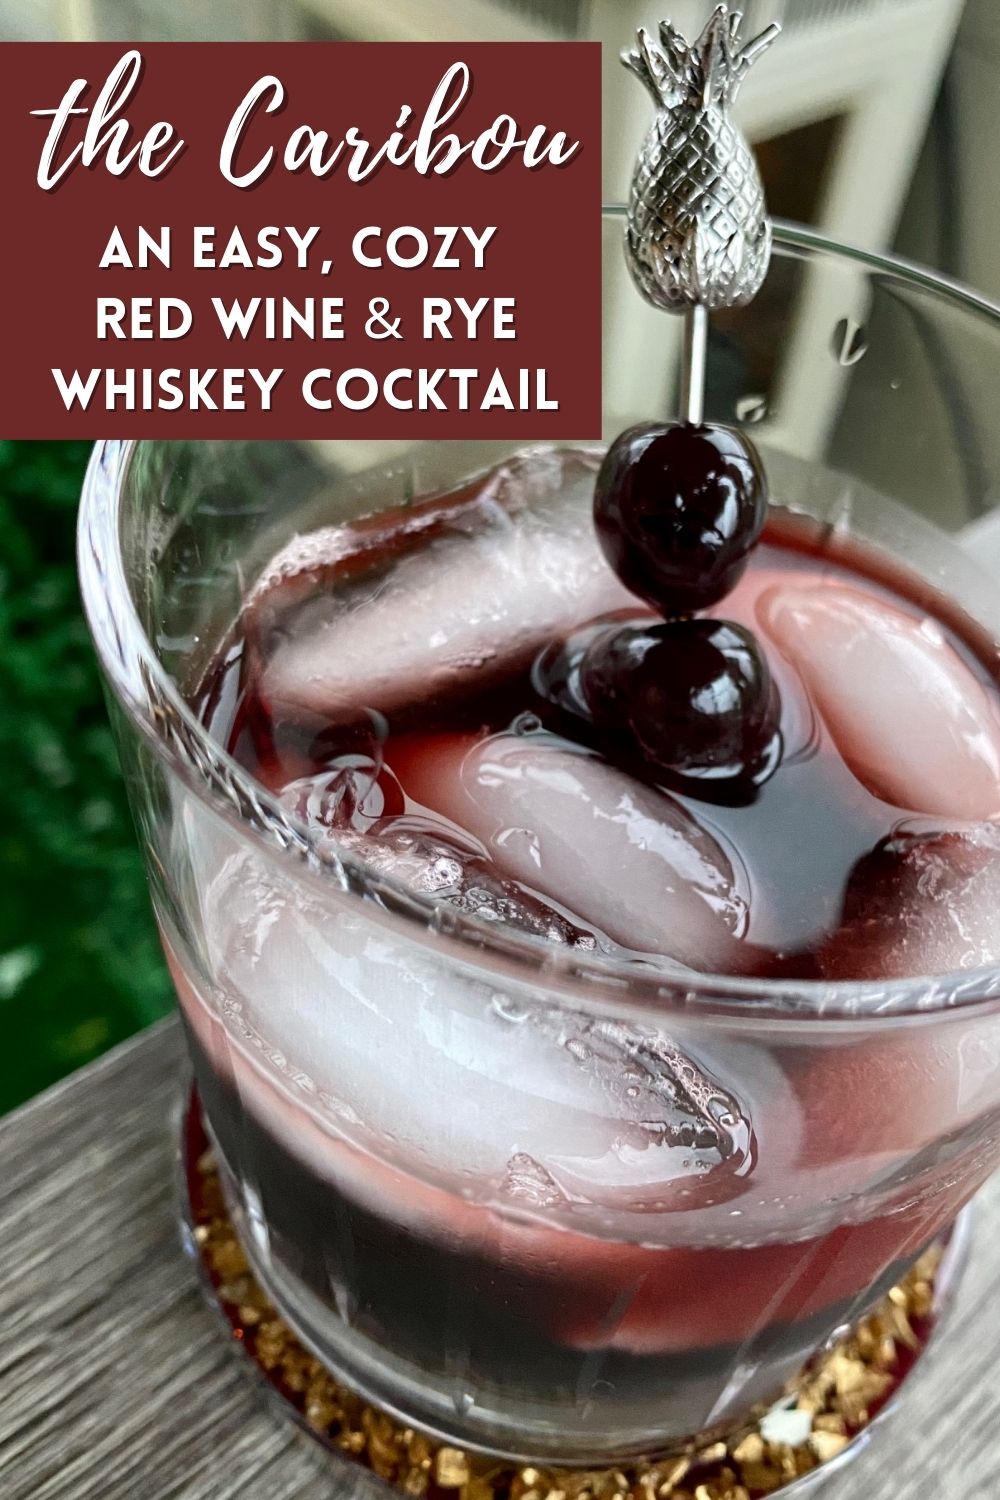 The Caribou (Easy, Cozy Drink Recipe) | The Caribou cocktail is a cozy French-Canadian drink that's perfect to sip in winter or fall. This red wine or port and rye whiskey cocktail is super easy (no special equipment or techniques) and also super delicious! A historic Quebec whisky drink with a splash of maple syrup...super easy & a perfect winter cocktail! #falldrink #wintercocktail #cocktailrecipes #port #redwine #ryewhiskey